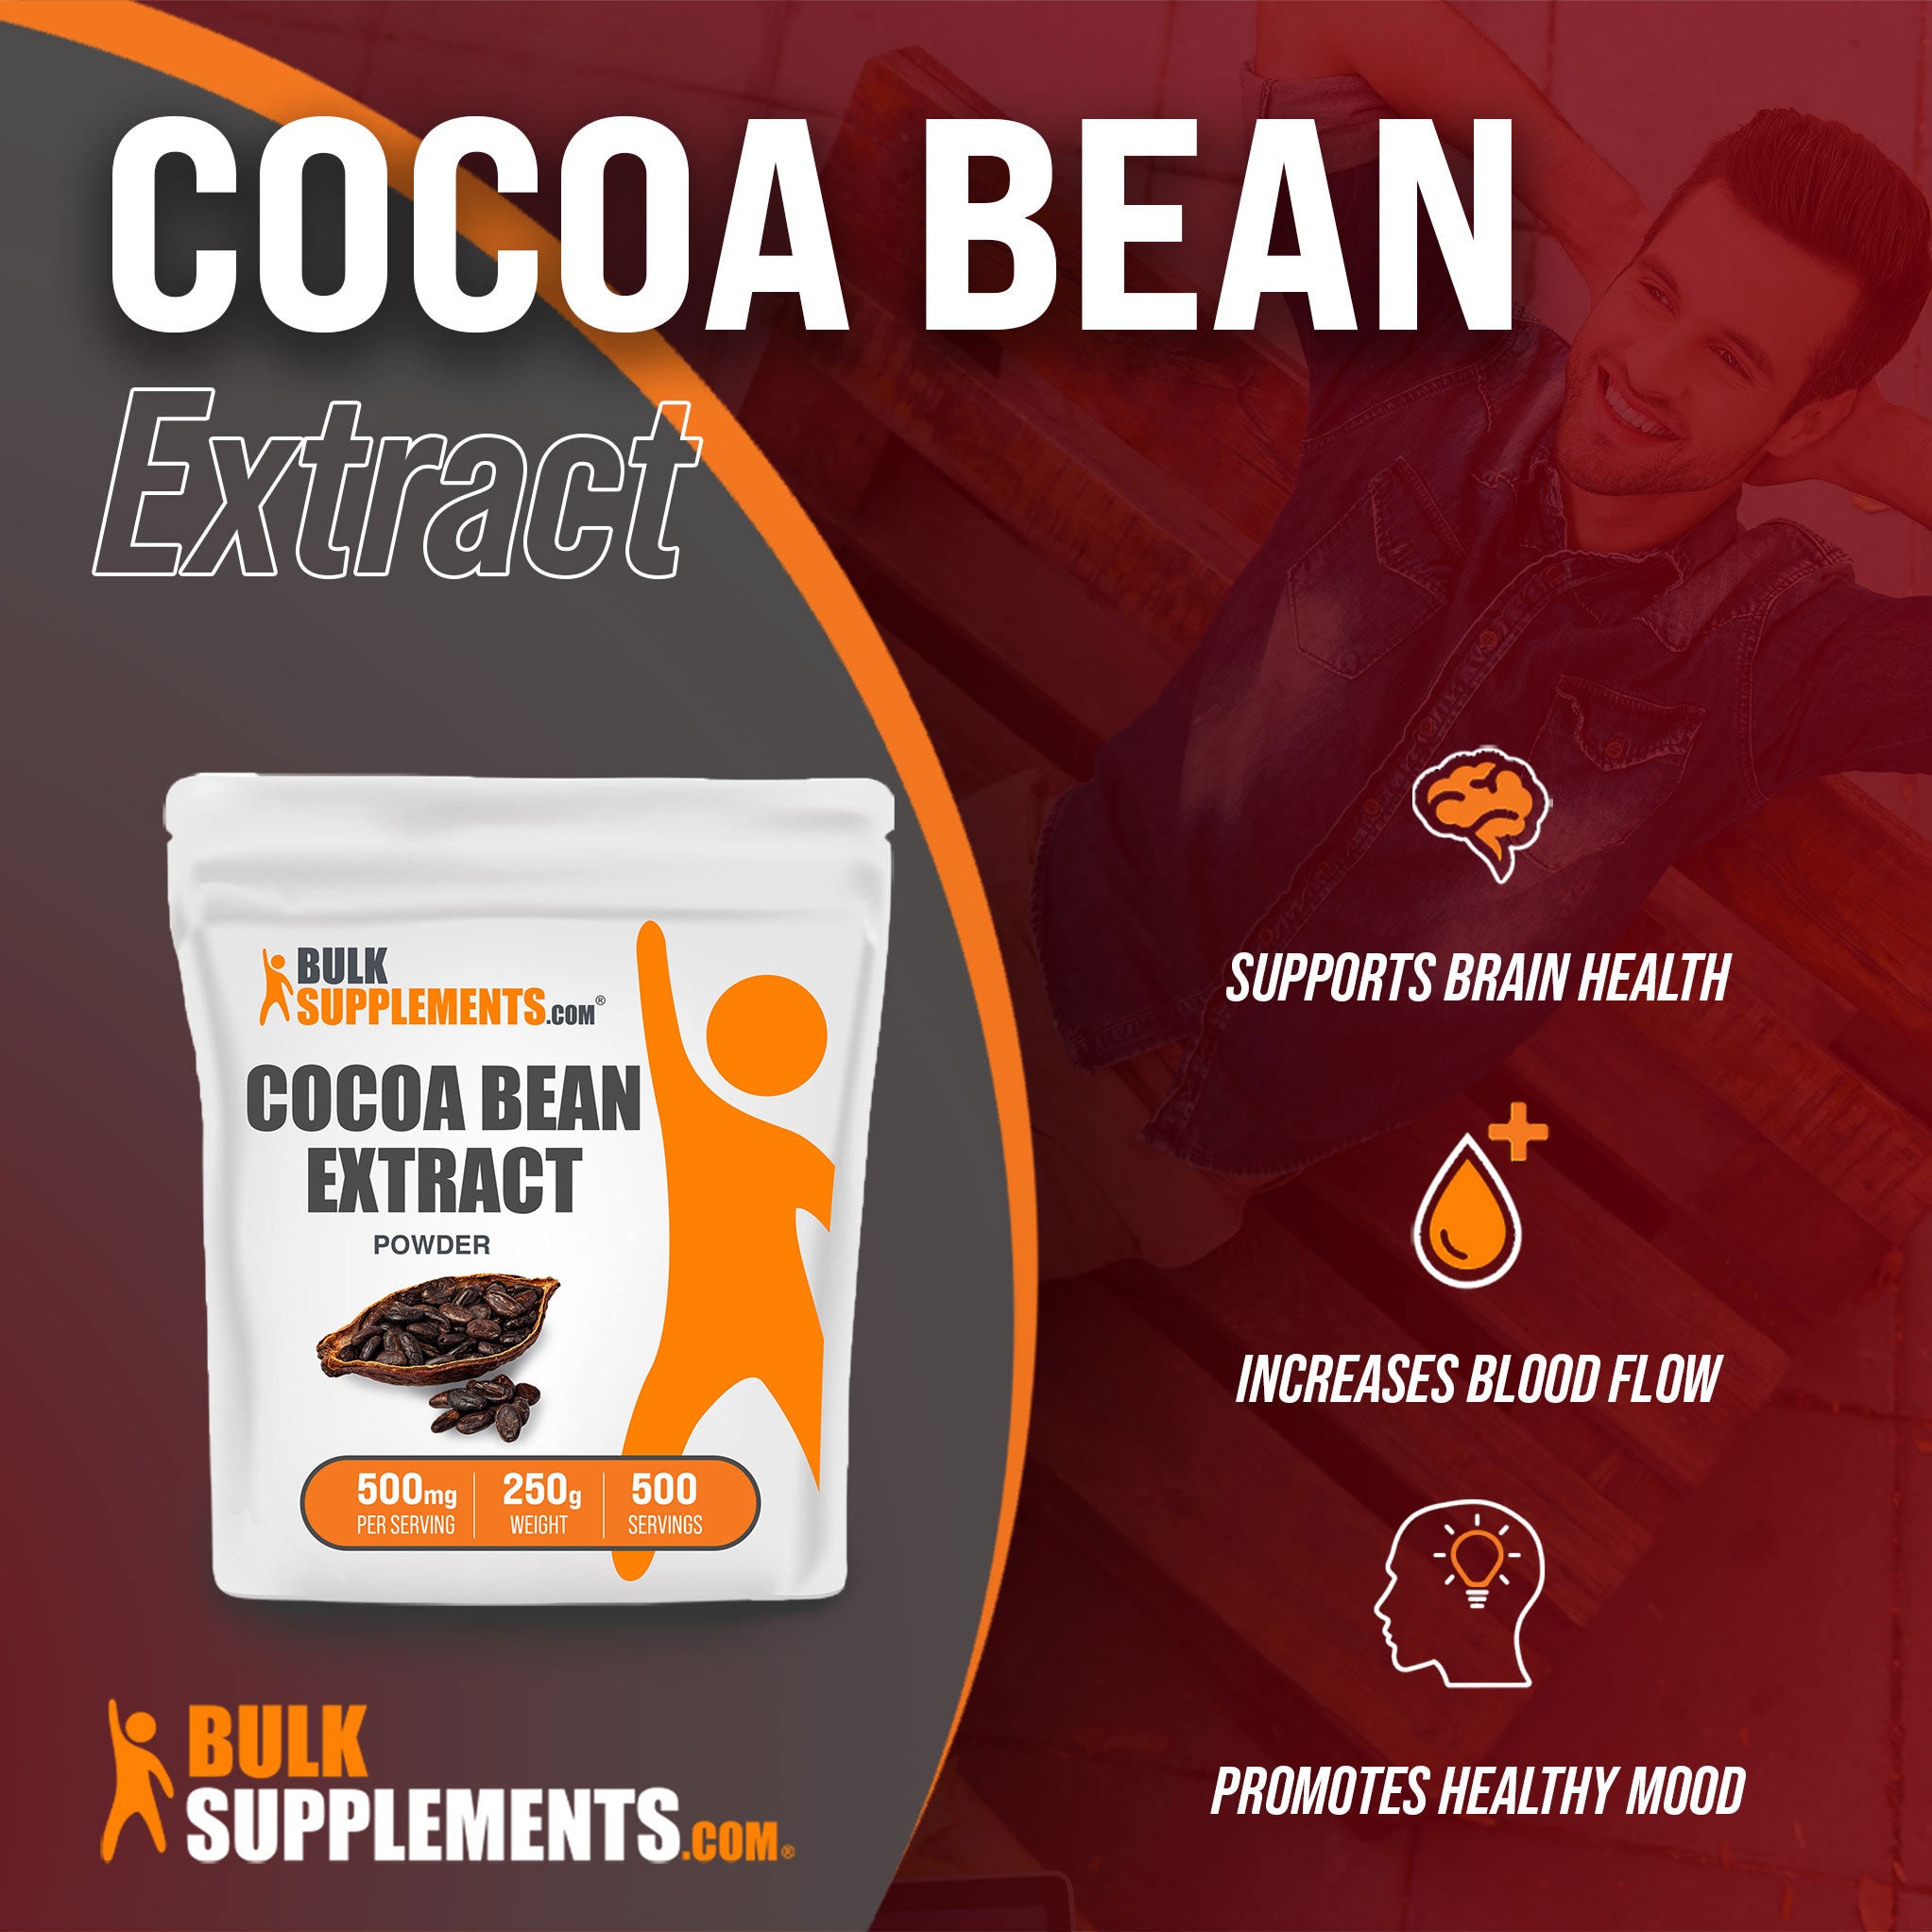 250g Cocoa Bean circulation supplements; supports brain health, increases blood flow, promotes healthy mood